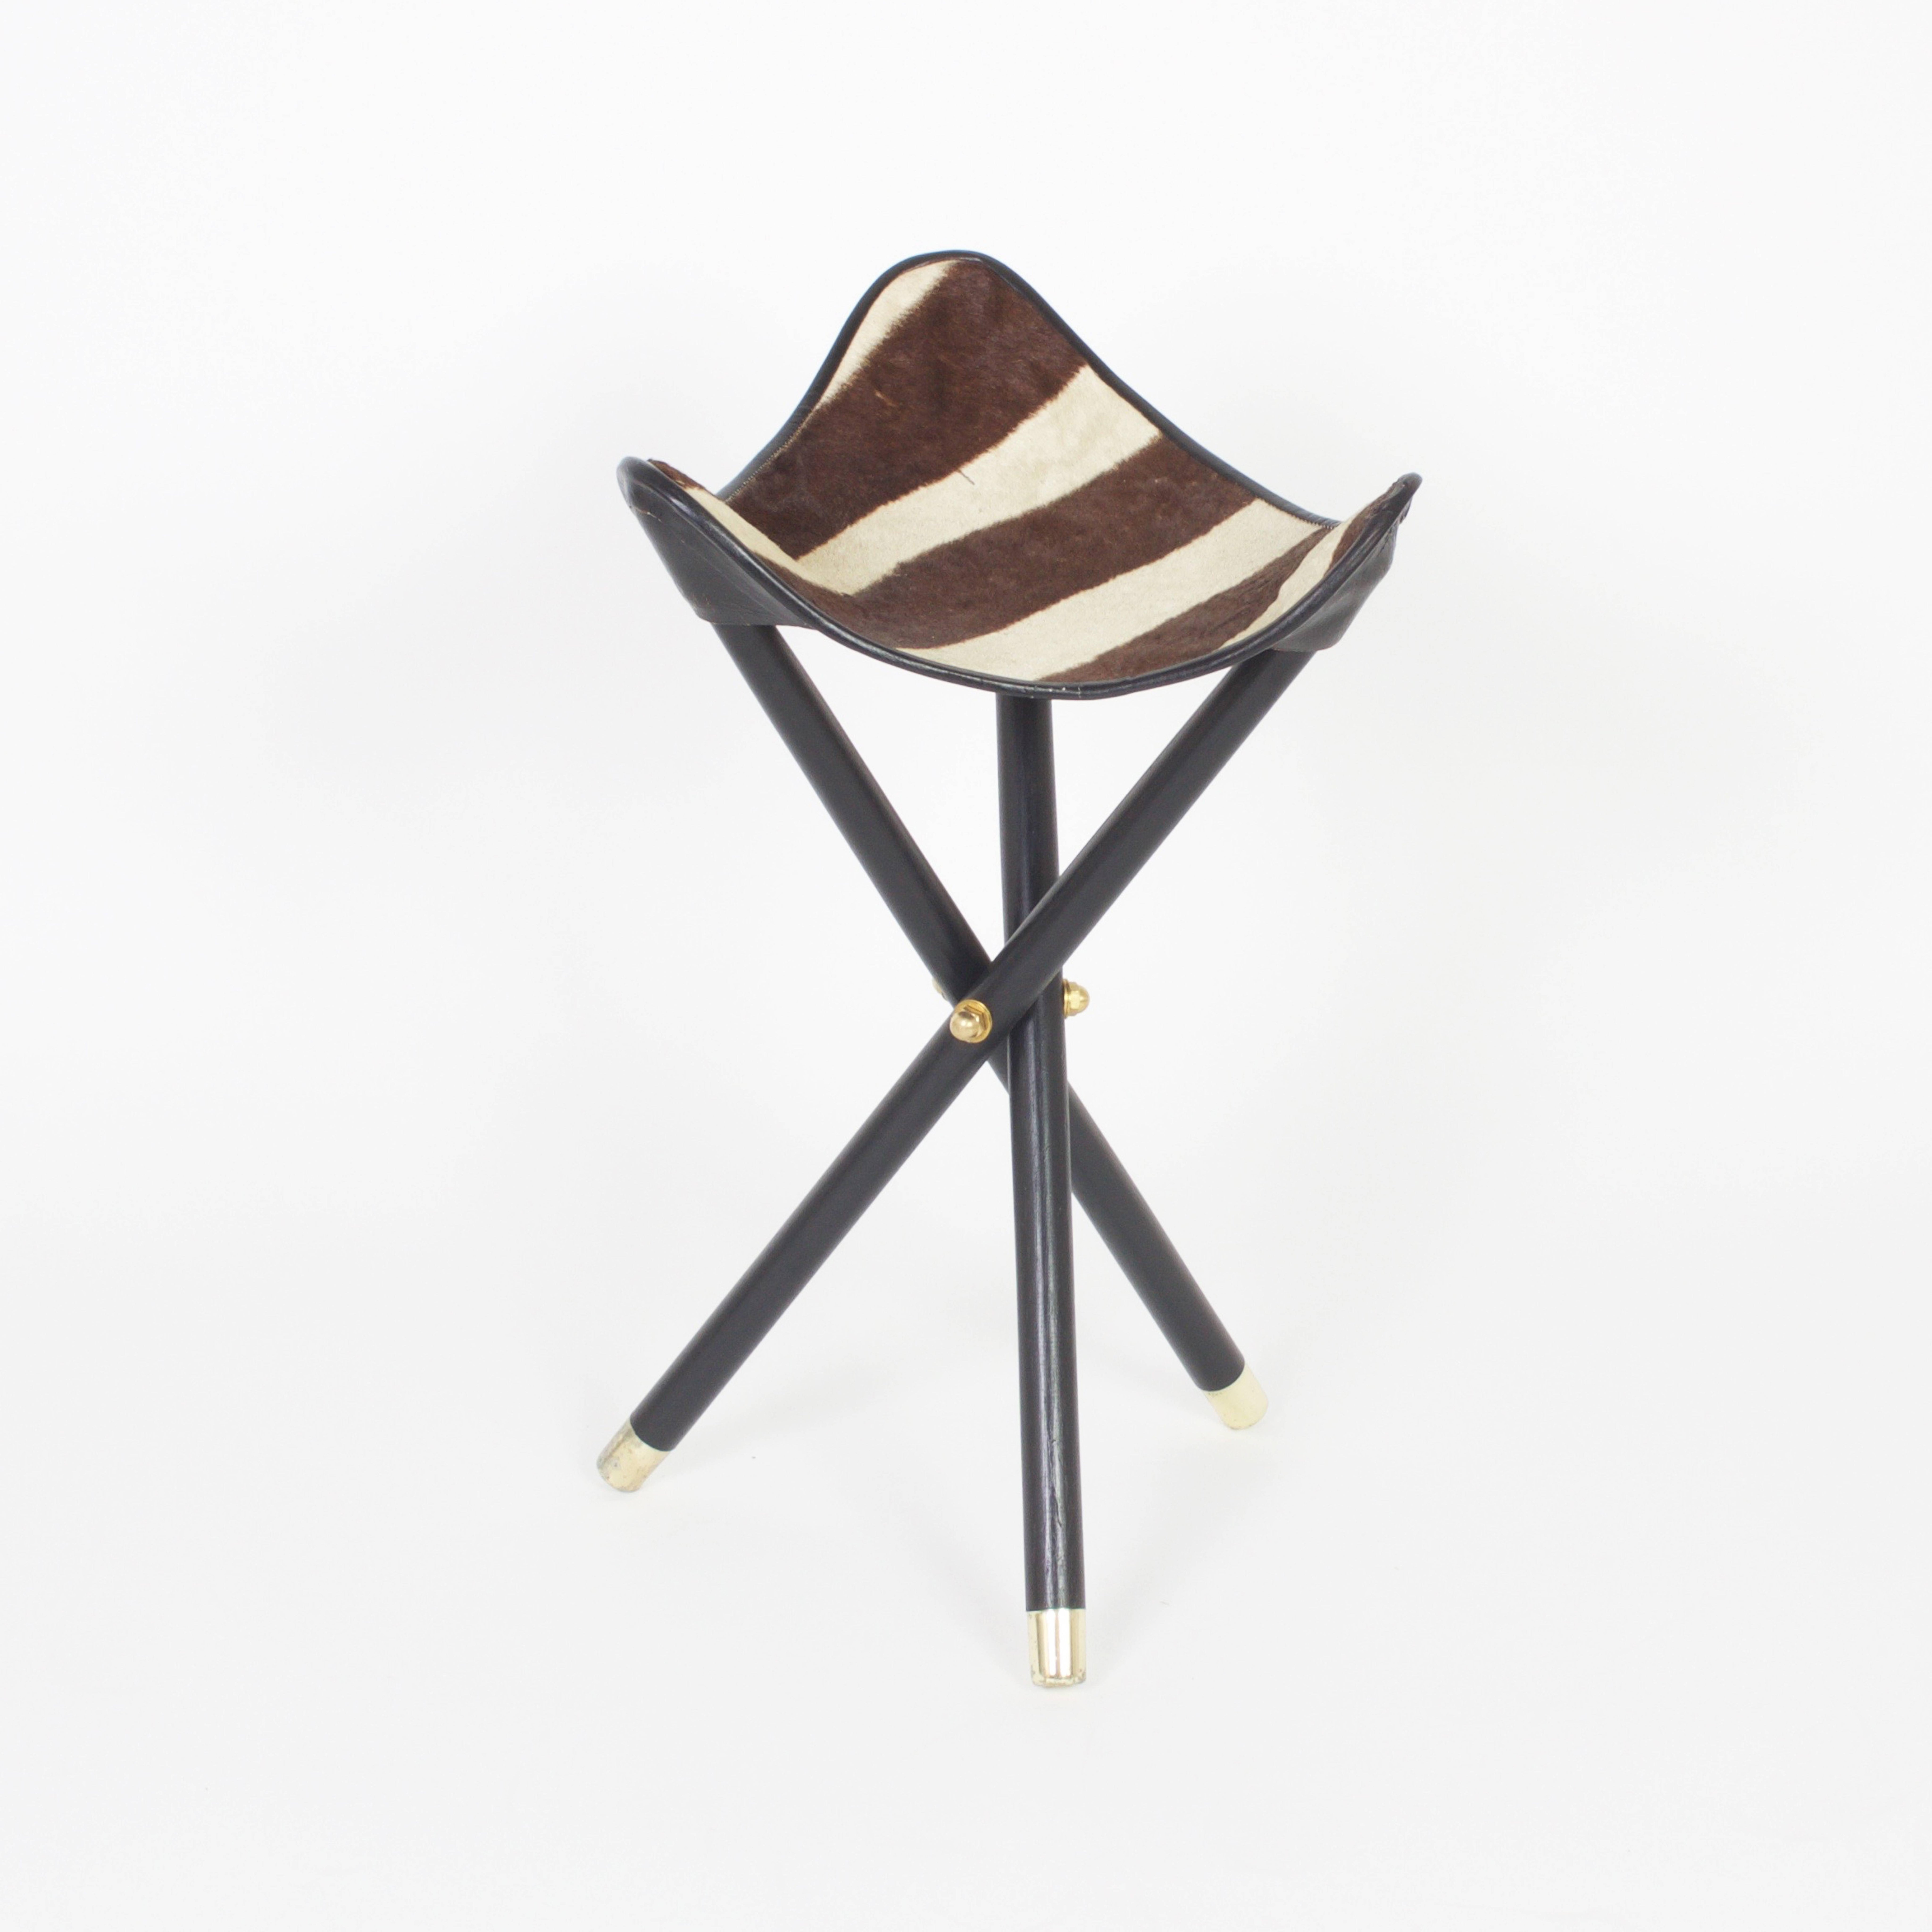 This stool crosses over from traditional 19th century campaign to Mid-Century chic. A pristine Campaign style stool with ebonized, tripod, folding legs detailed in silvered metal feet and sling style leather with a zebra skin removable seat. It can